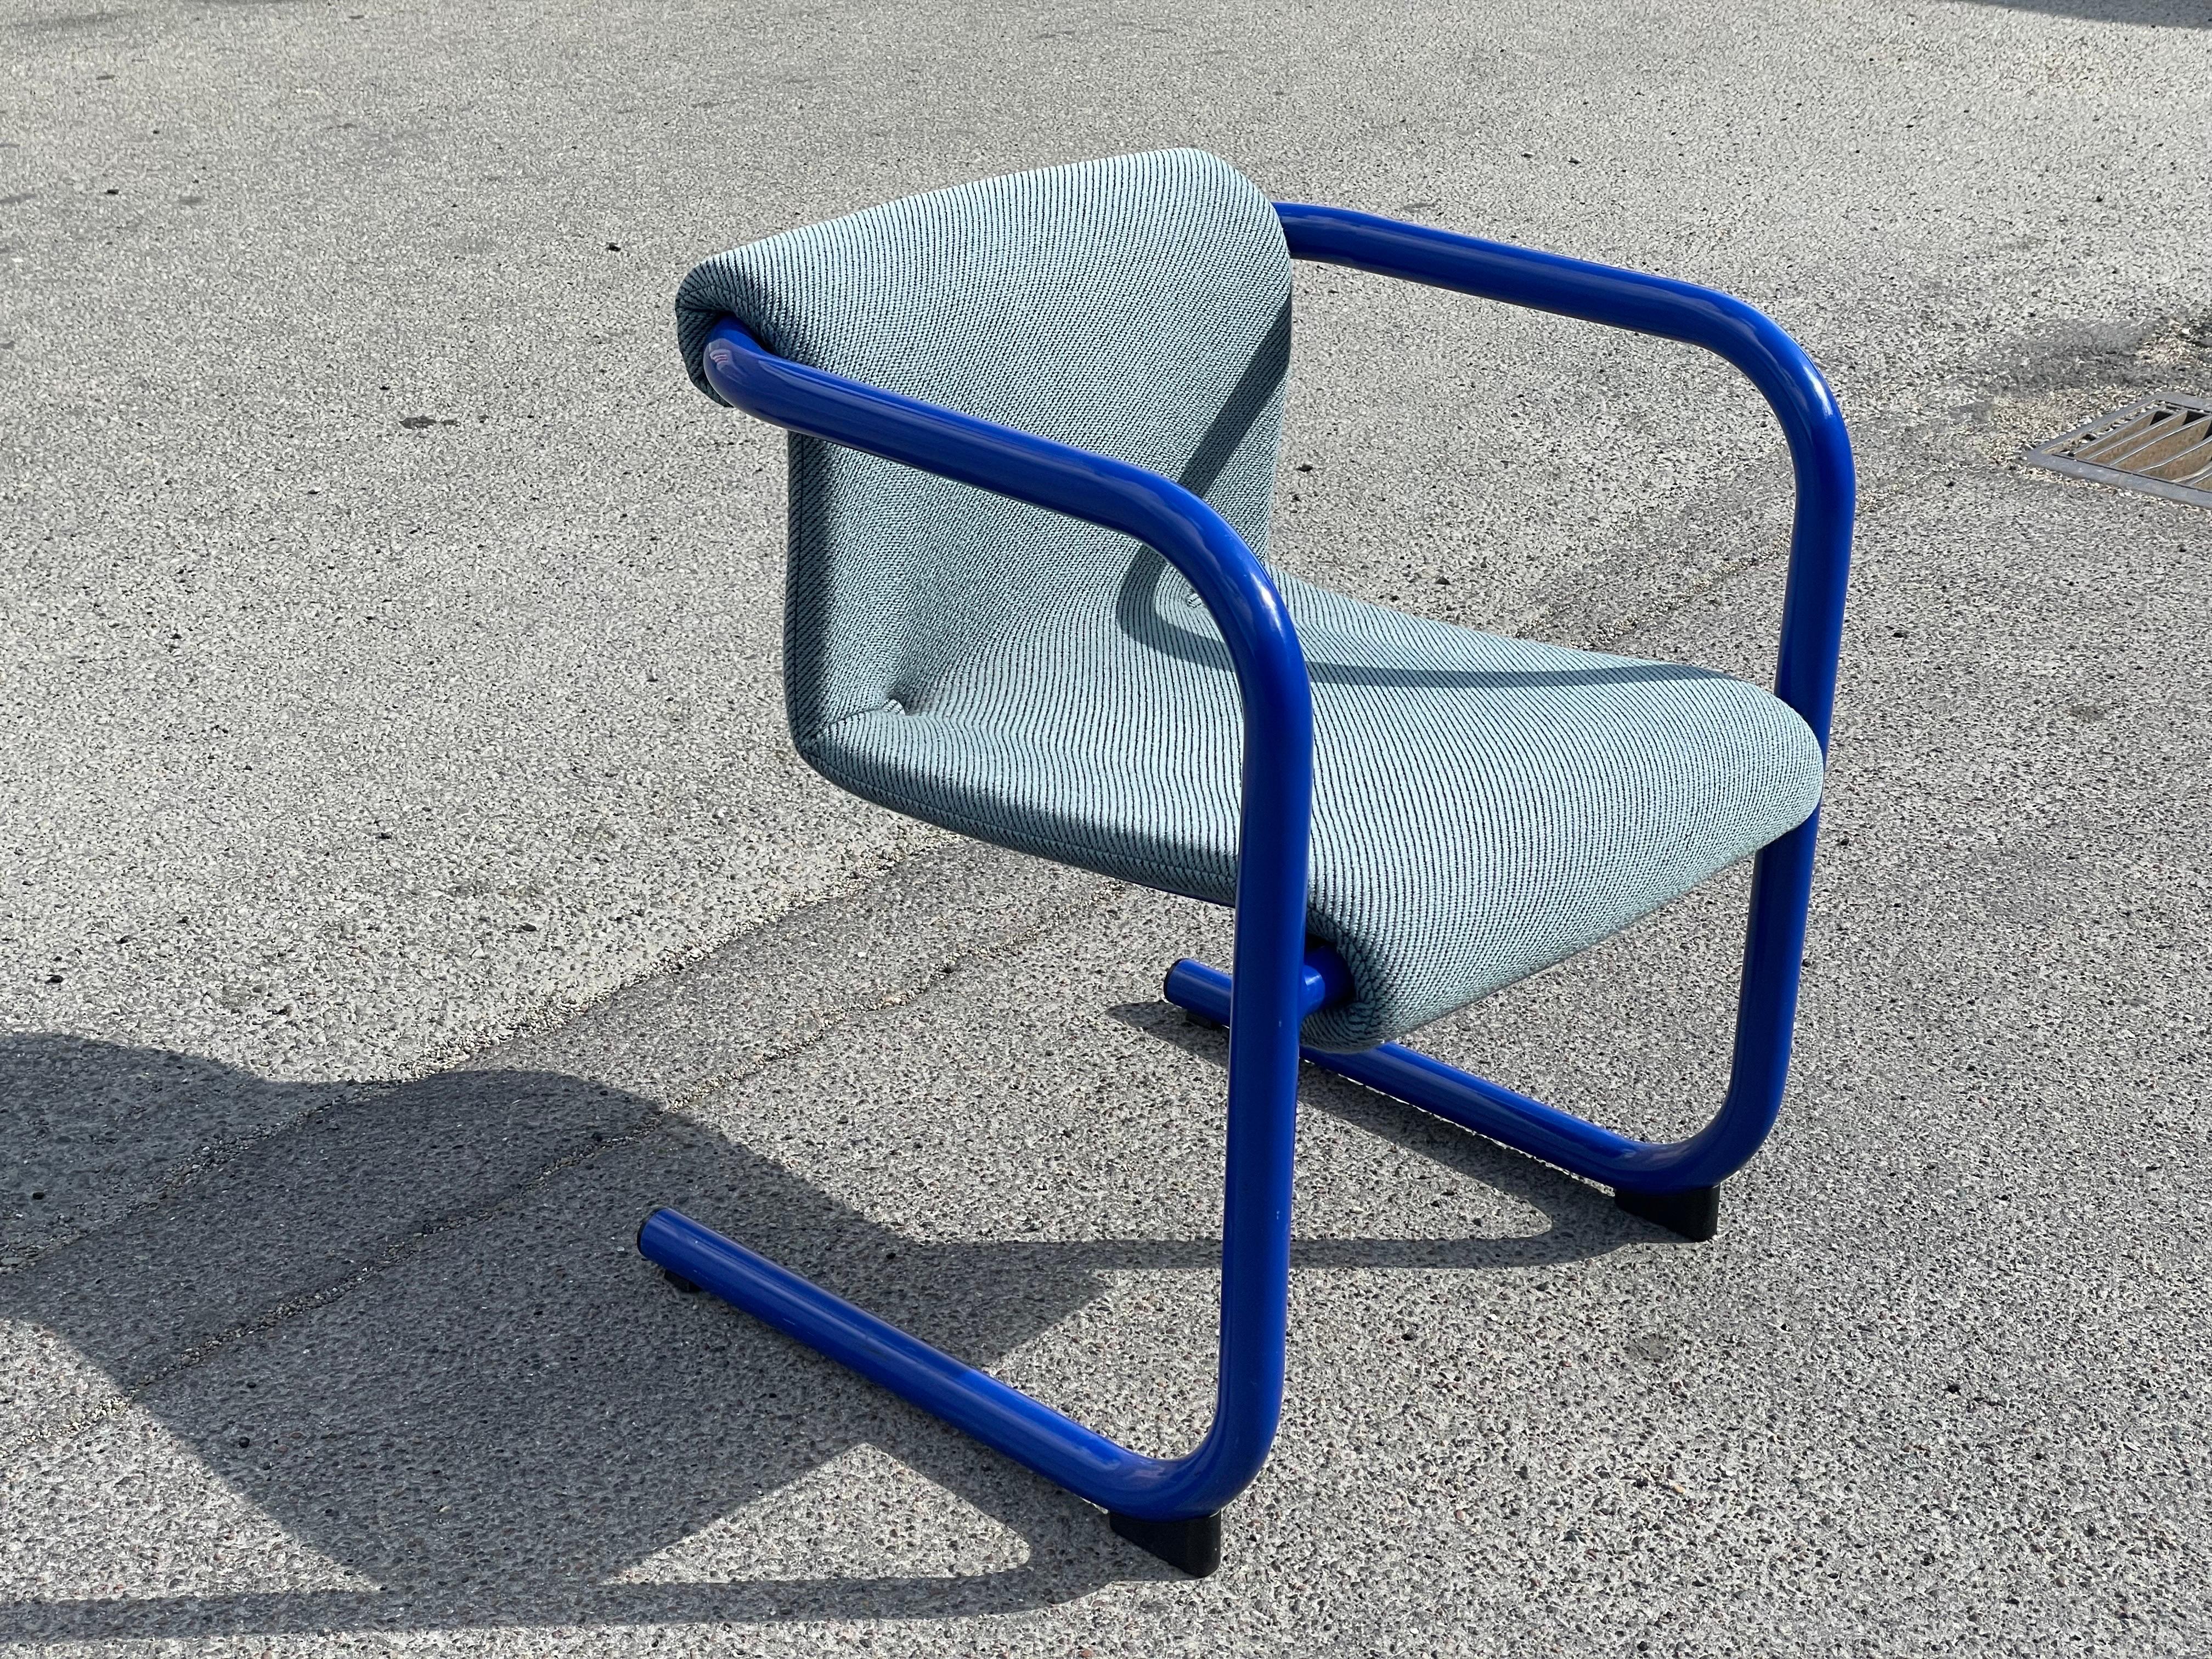 A Danish design treasure from the 1980s - the Cantilever Armchair by Knud Friis & Elmar Moltke Nielsen. This iconic blue piece showcases the perfect blend of Danish craftsmanship and contemporary aesthetics. With its sleek and innovative cantilever